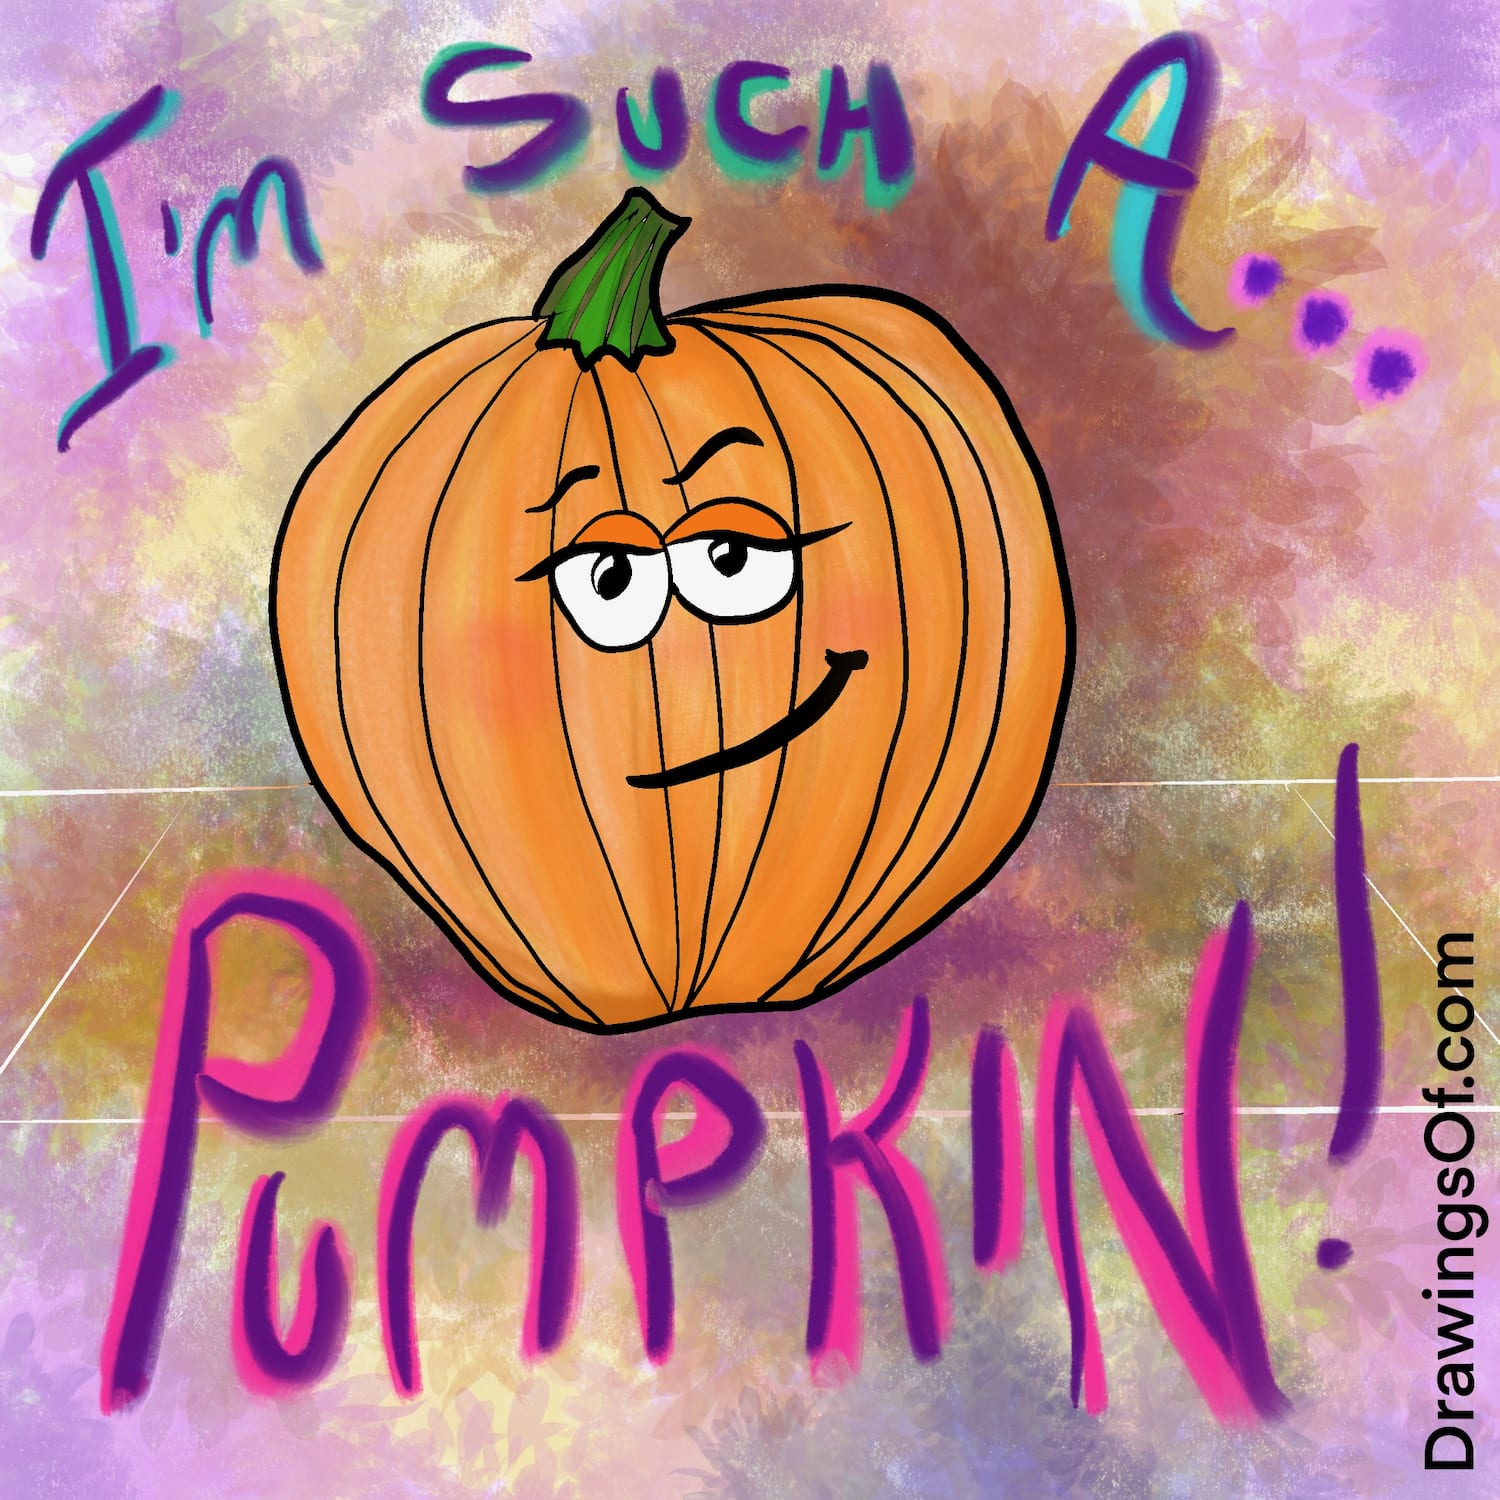 A Magical Cartoon Pumpkin Story: Saving the Fruit from Rot! - Drawings Of...